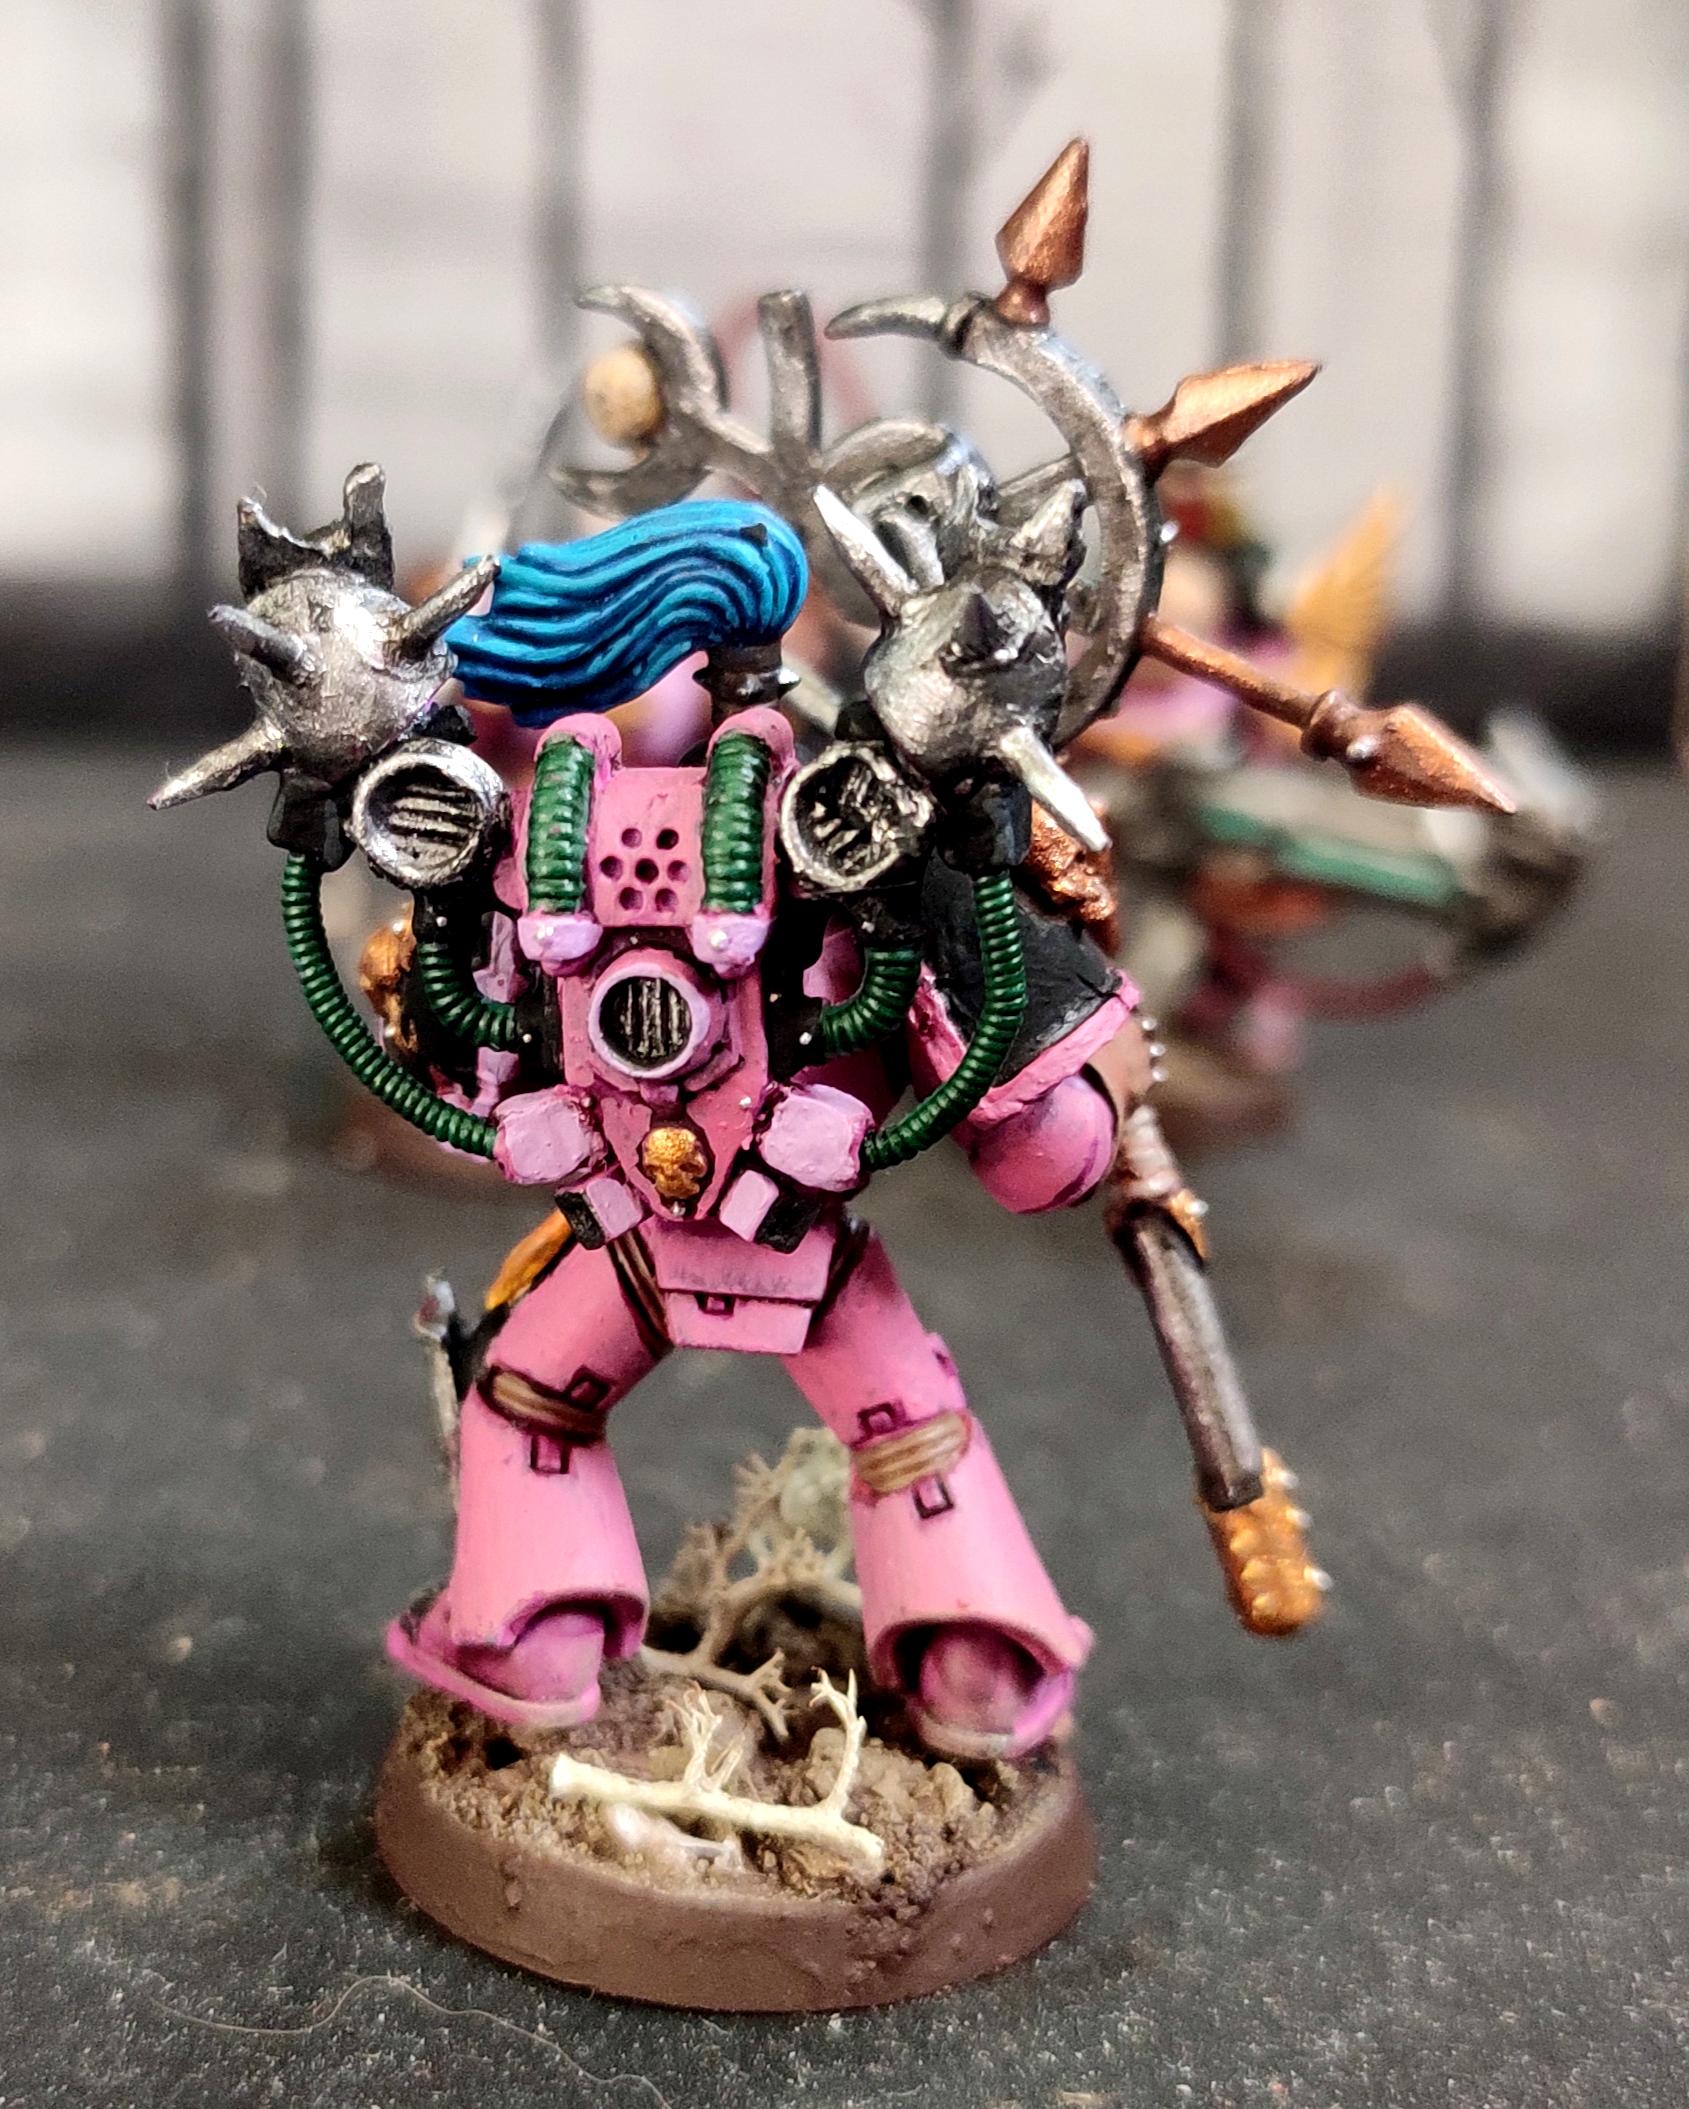 Chaos, Chaos Space Marines, Conversion, Doom Siren, Emperor's Children, Heresy, Heretic Astartes, Icon Bearer, Infantry, Kitbash, Noise Marines, Perfection Or Death, Regiment, Slaanesh, Traitor Legions, Warhammer 40,000